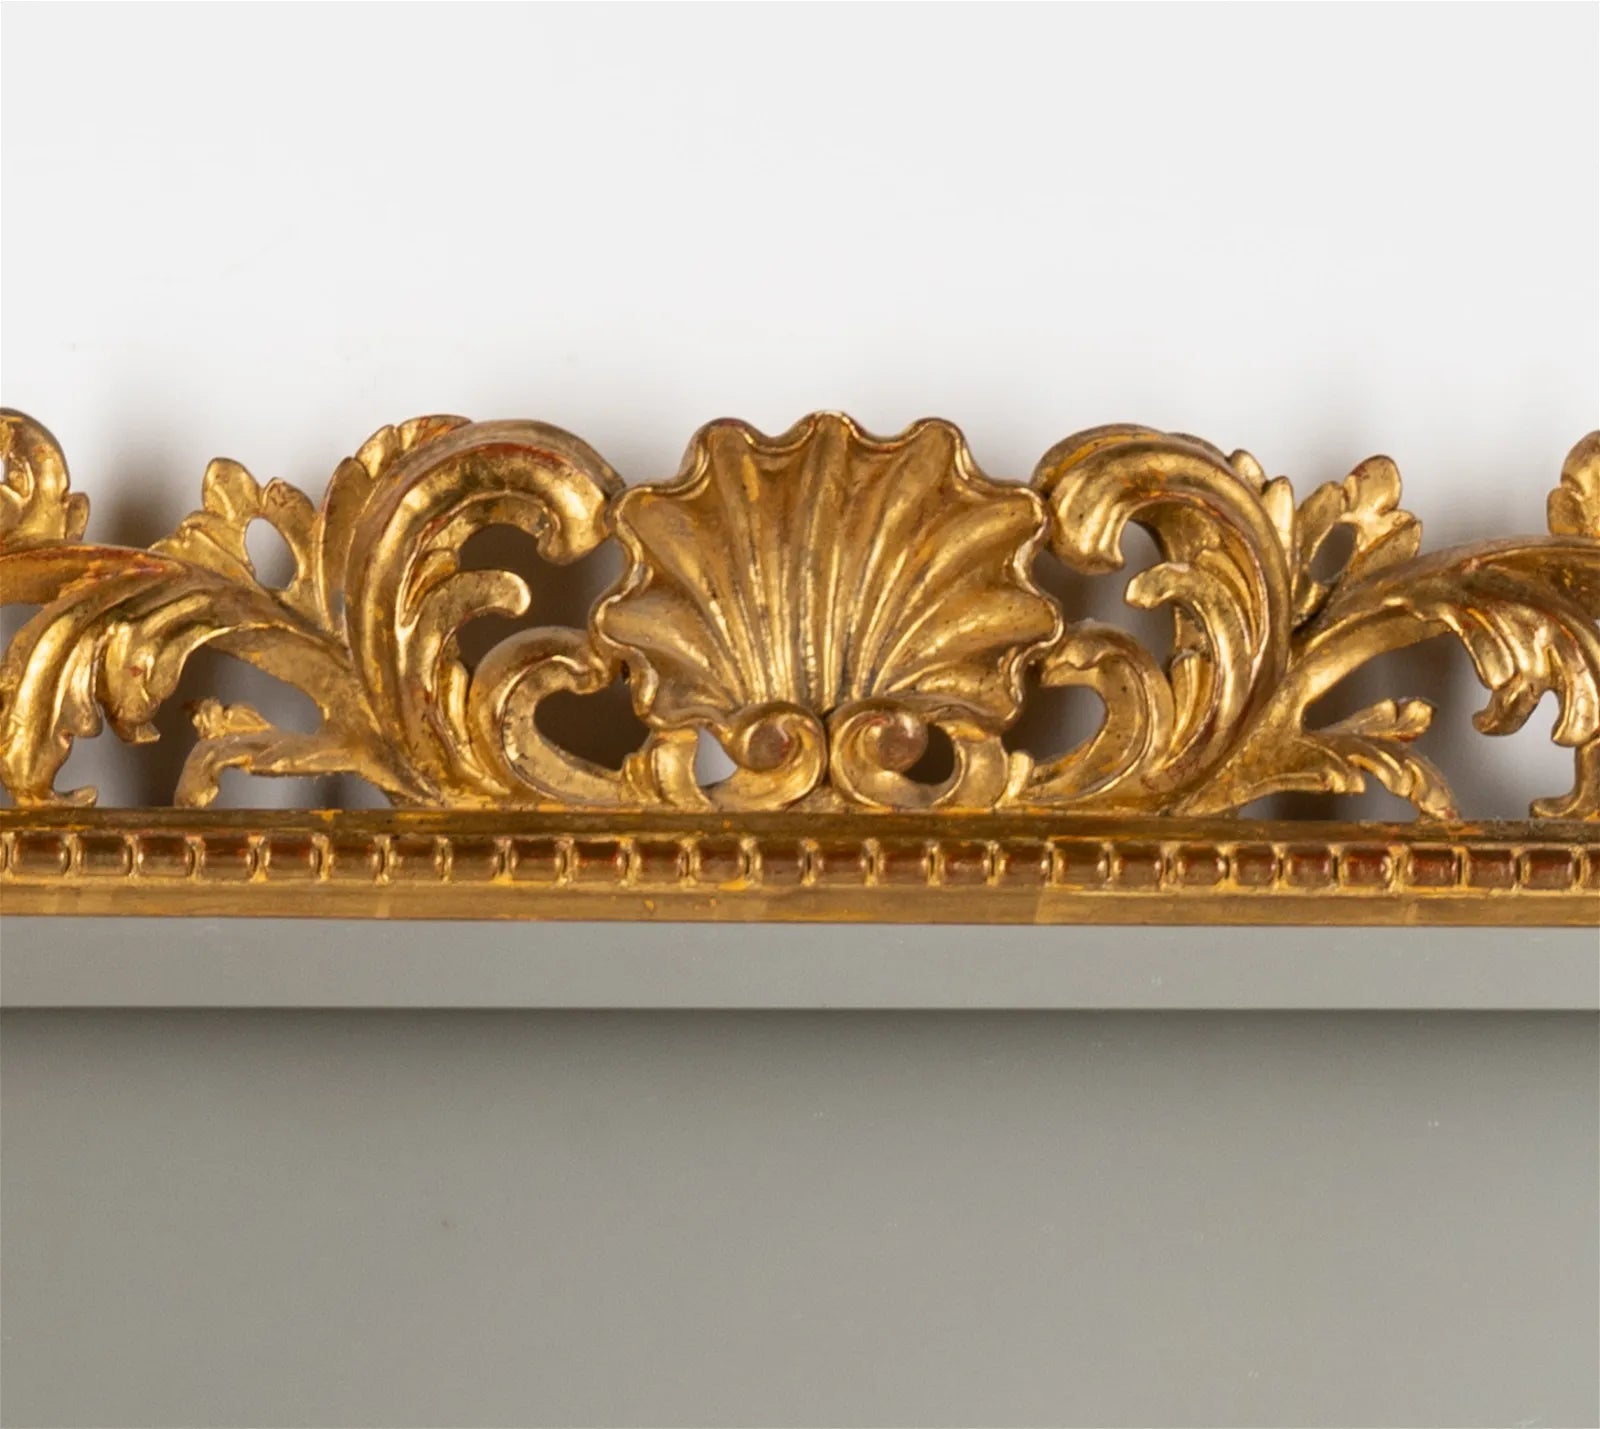 AF7-006: Late 20th Century Italian Baroque Carved Giltwood Wall Mirror